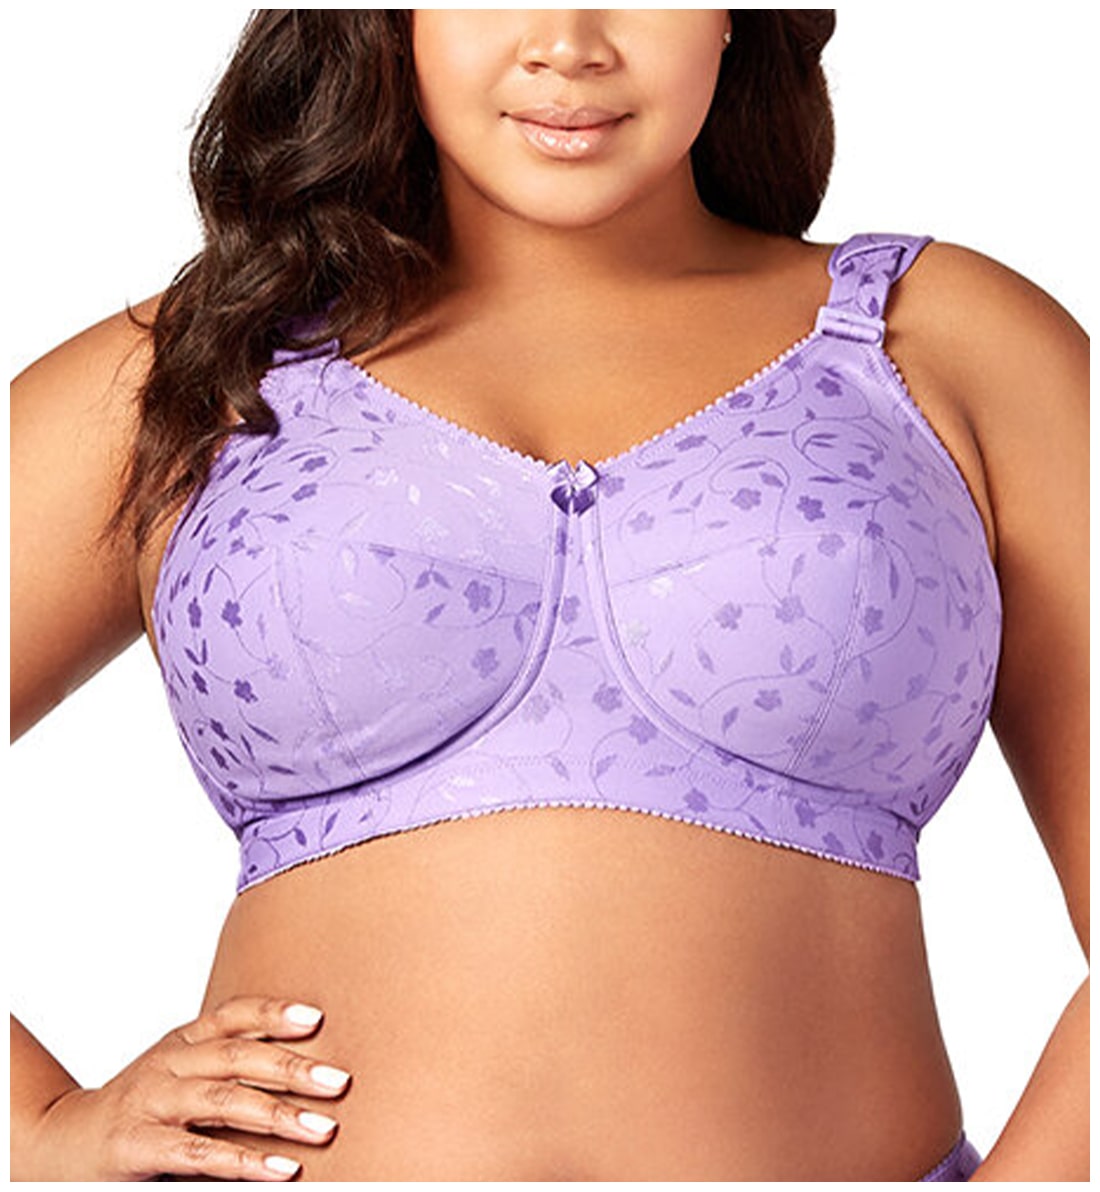 Elila Jacquard Full Support Softcup (1305),34F,Lilac - Lilac,34F